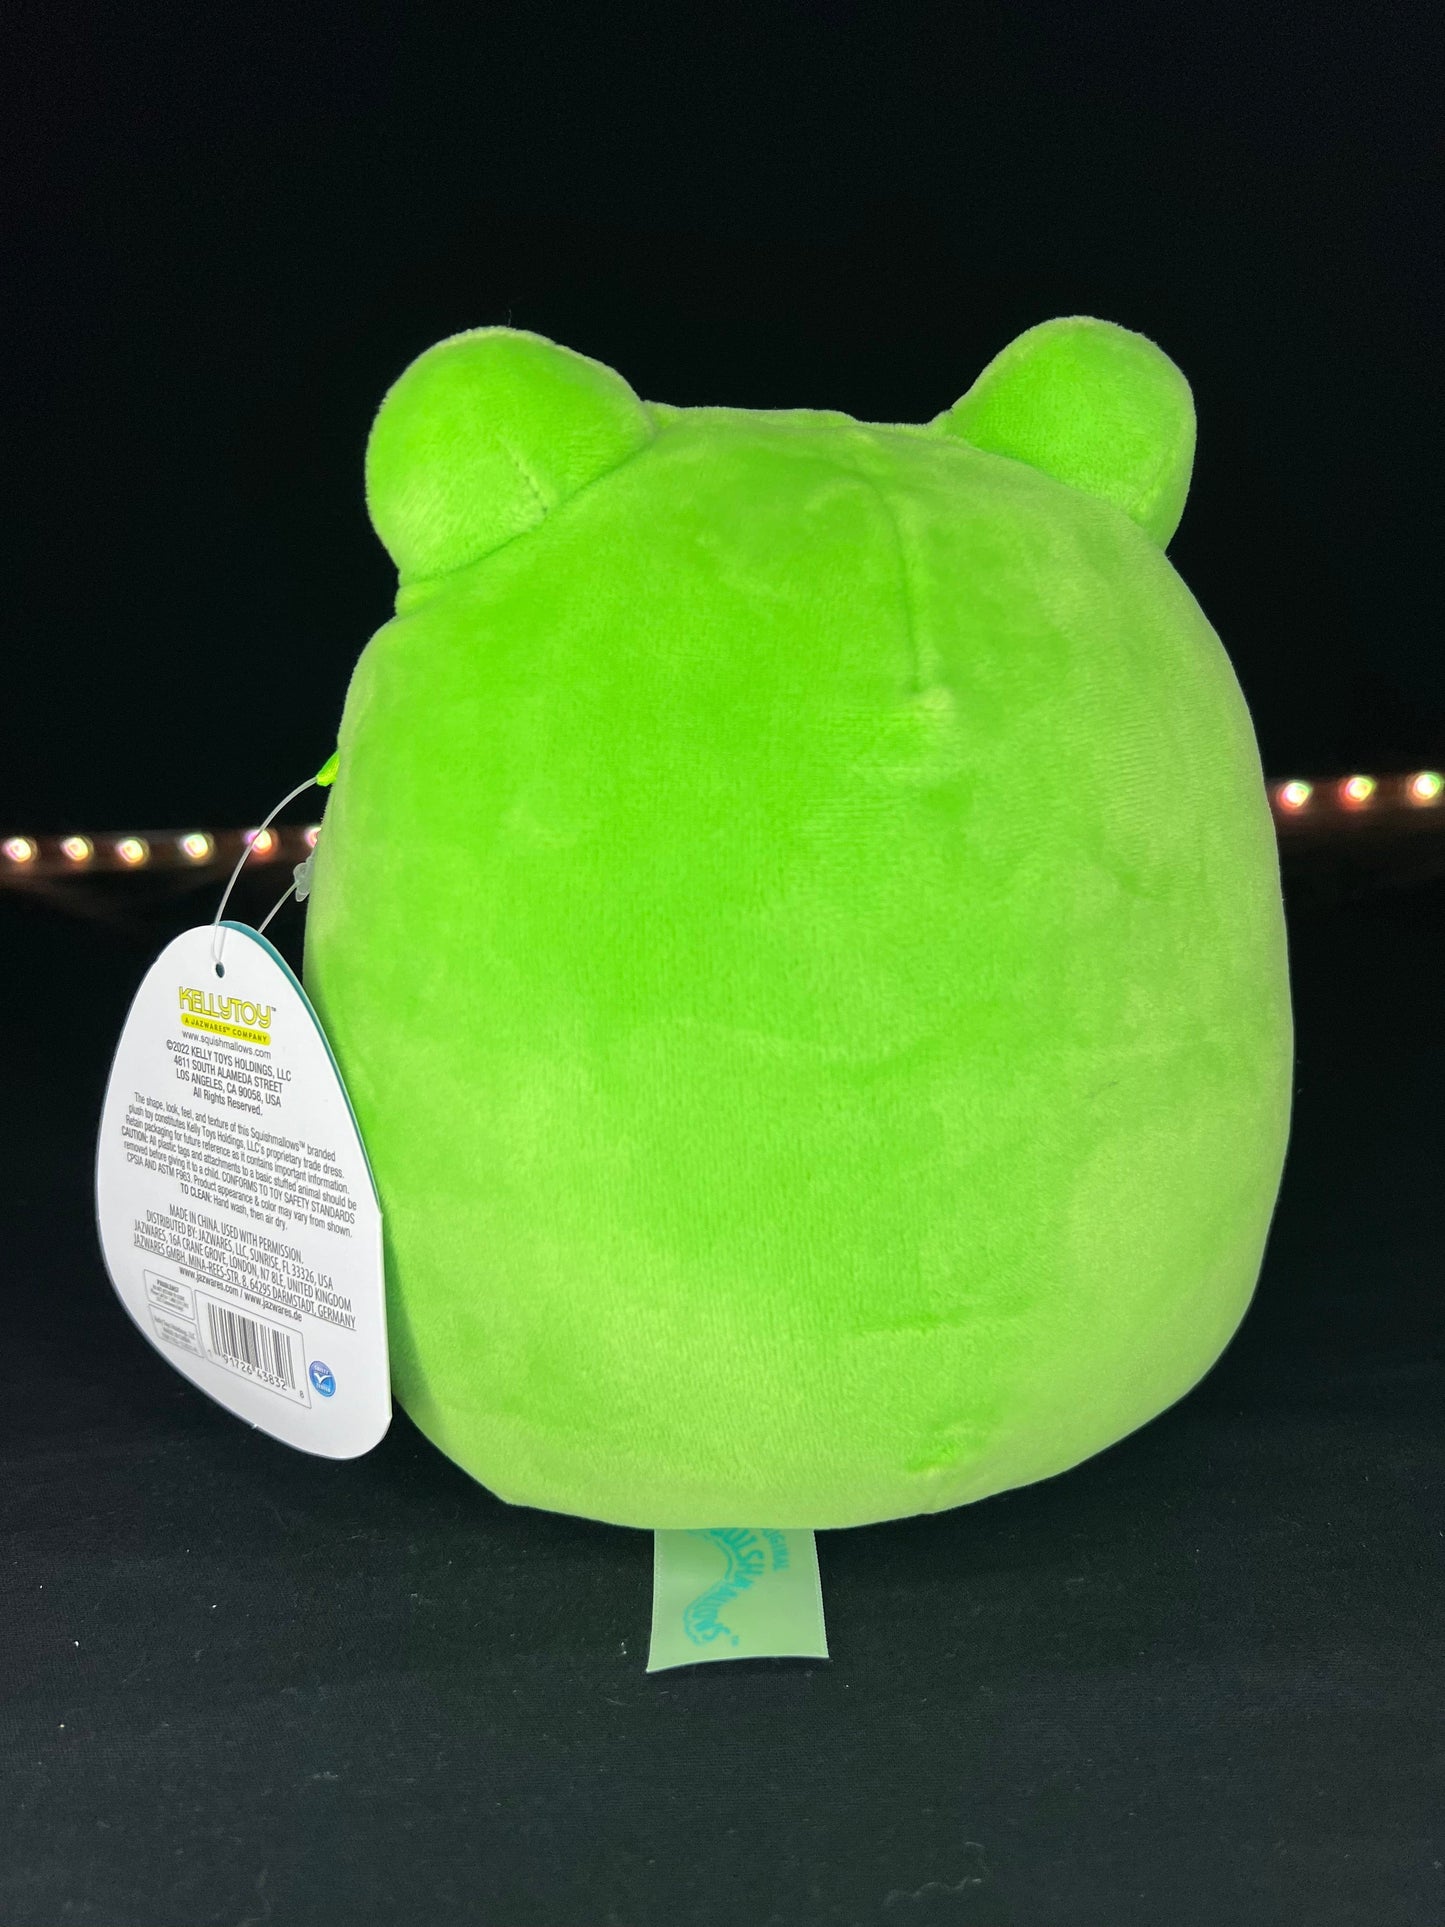 Squishmallow 7.5” Wendy the Frog.